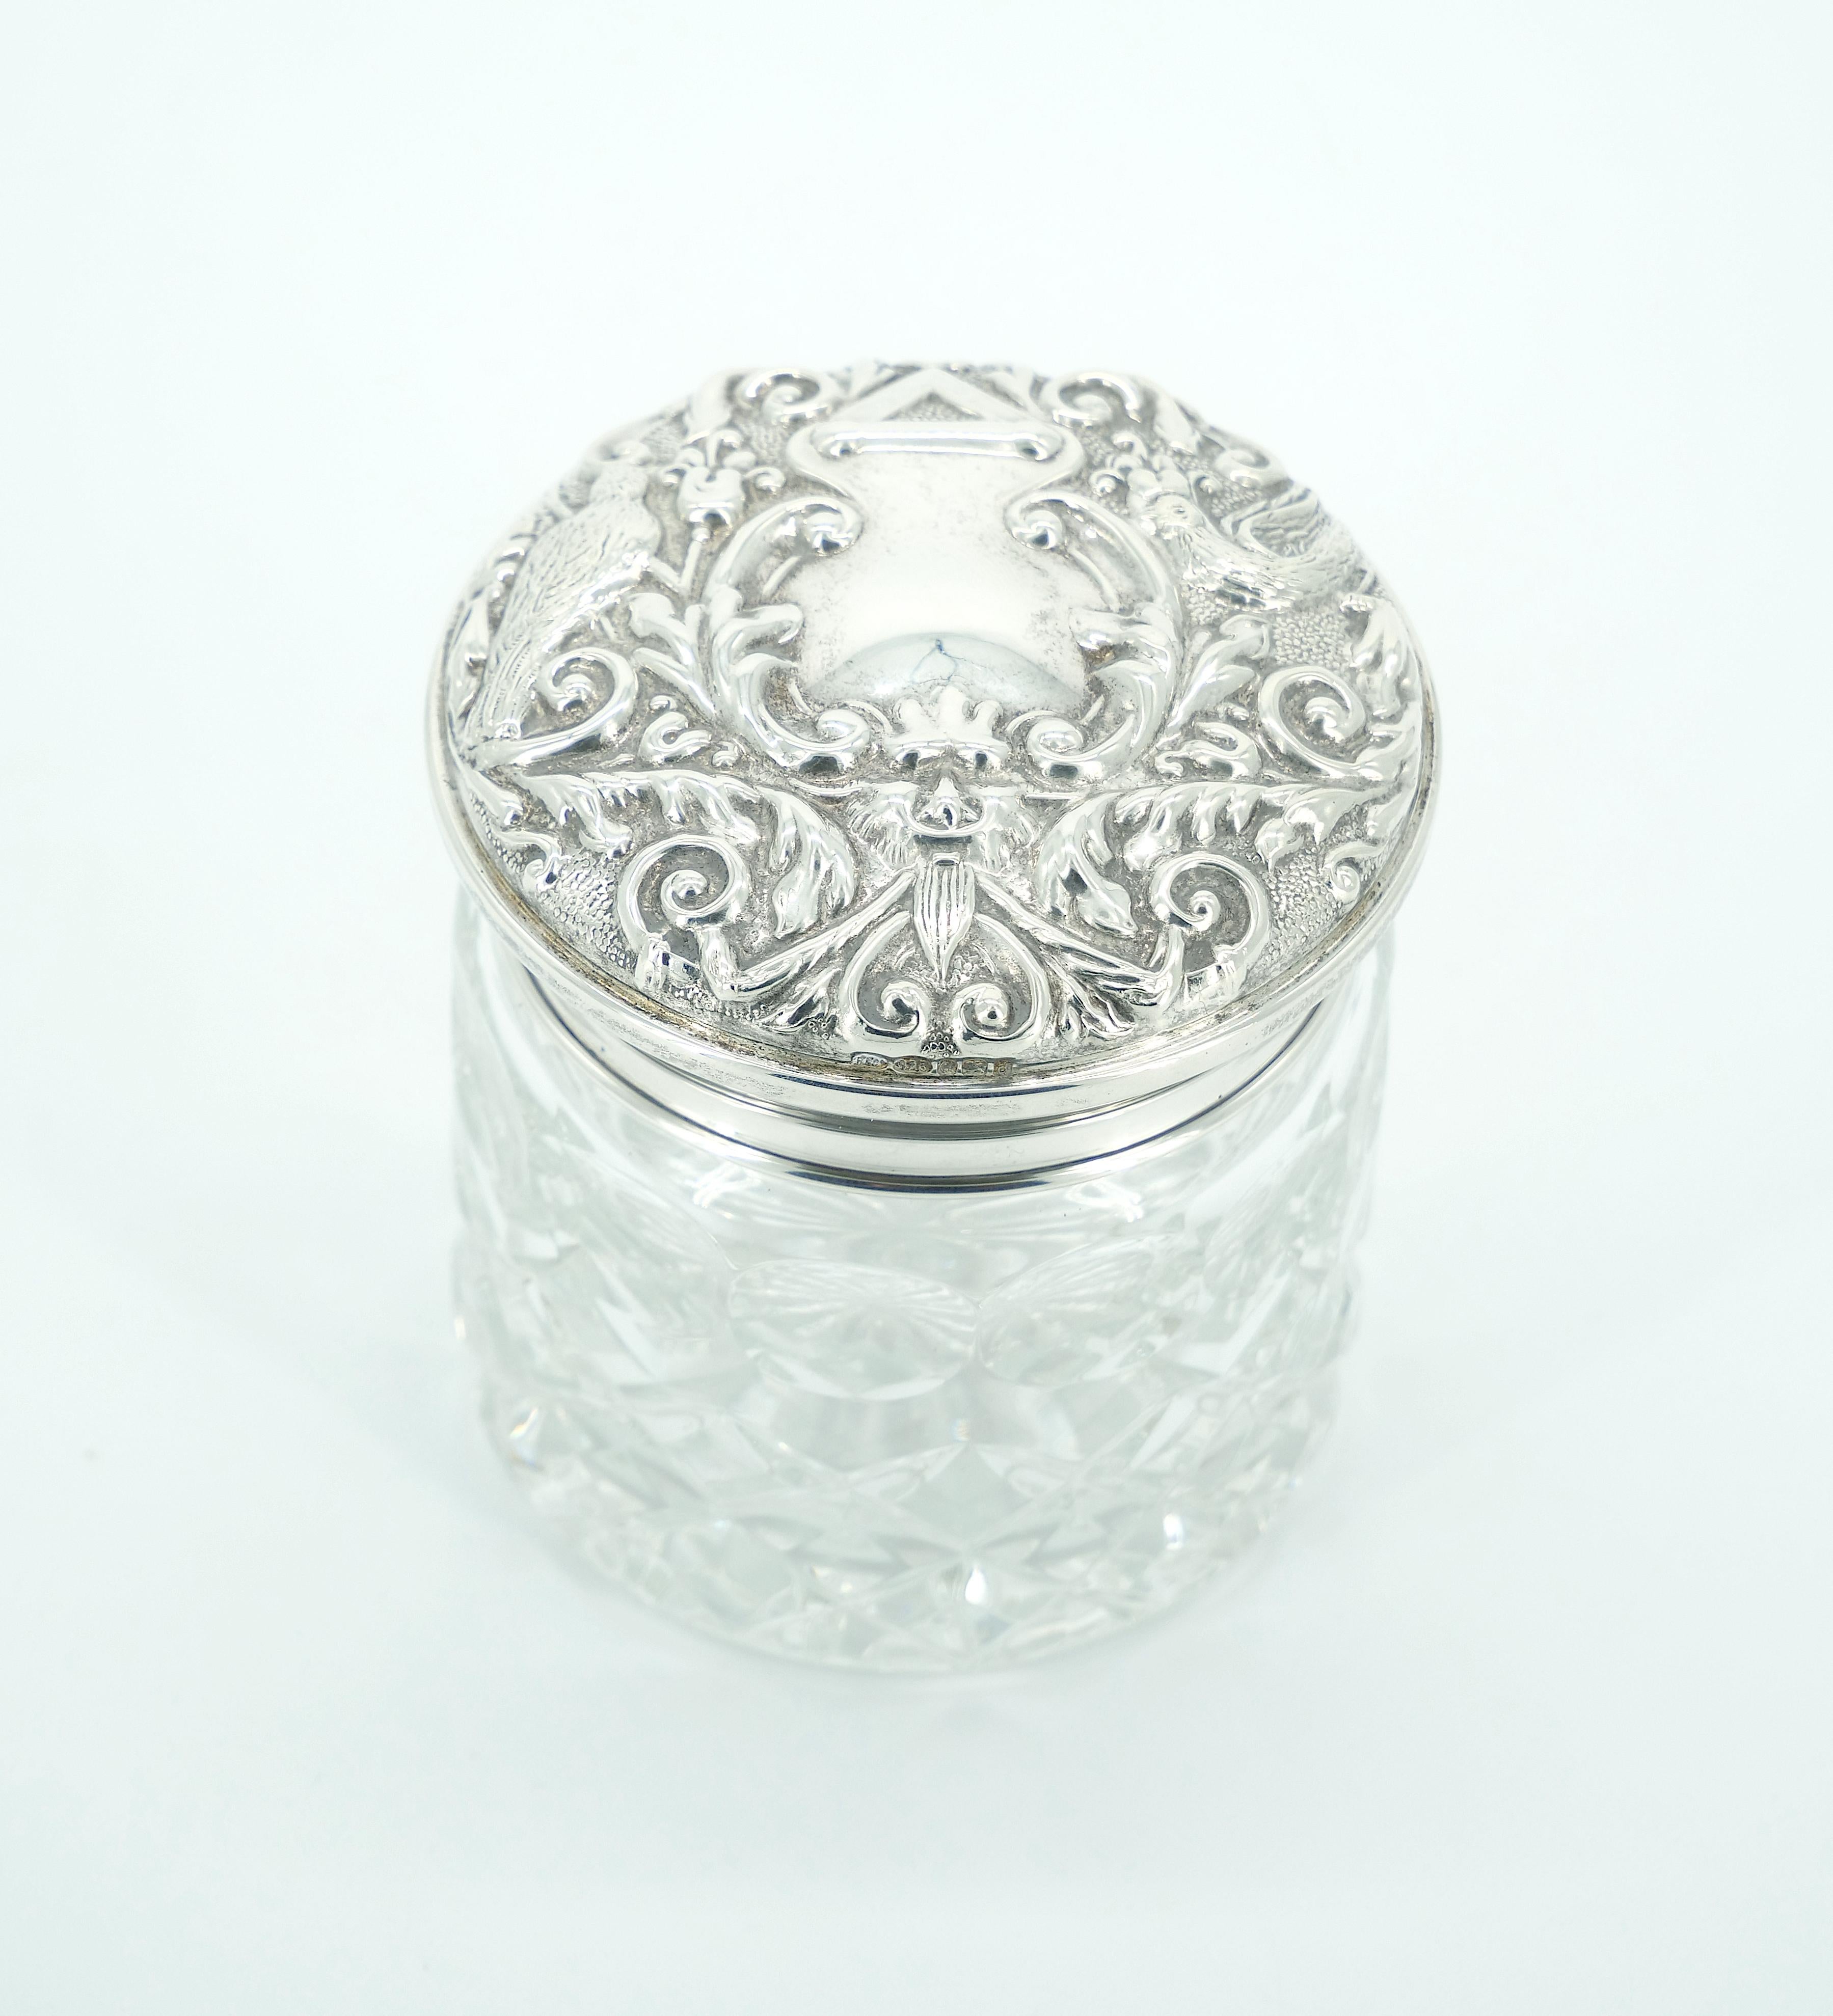 Engraved 19th Century English Sterling Silver Lidded Top / Cut Glass Covered Piece For Sale